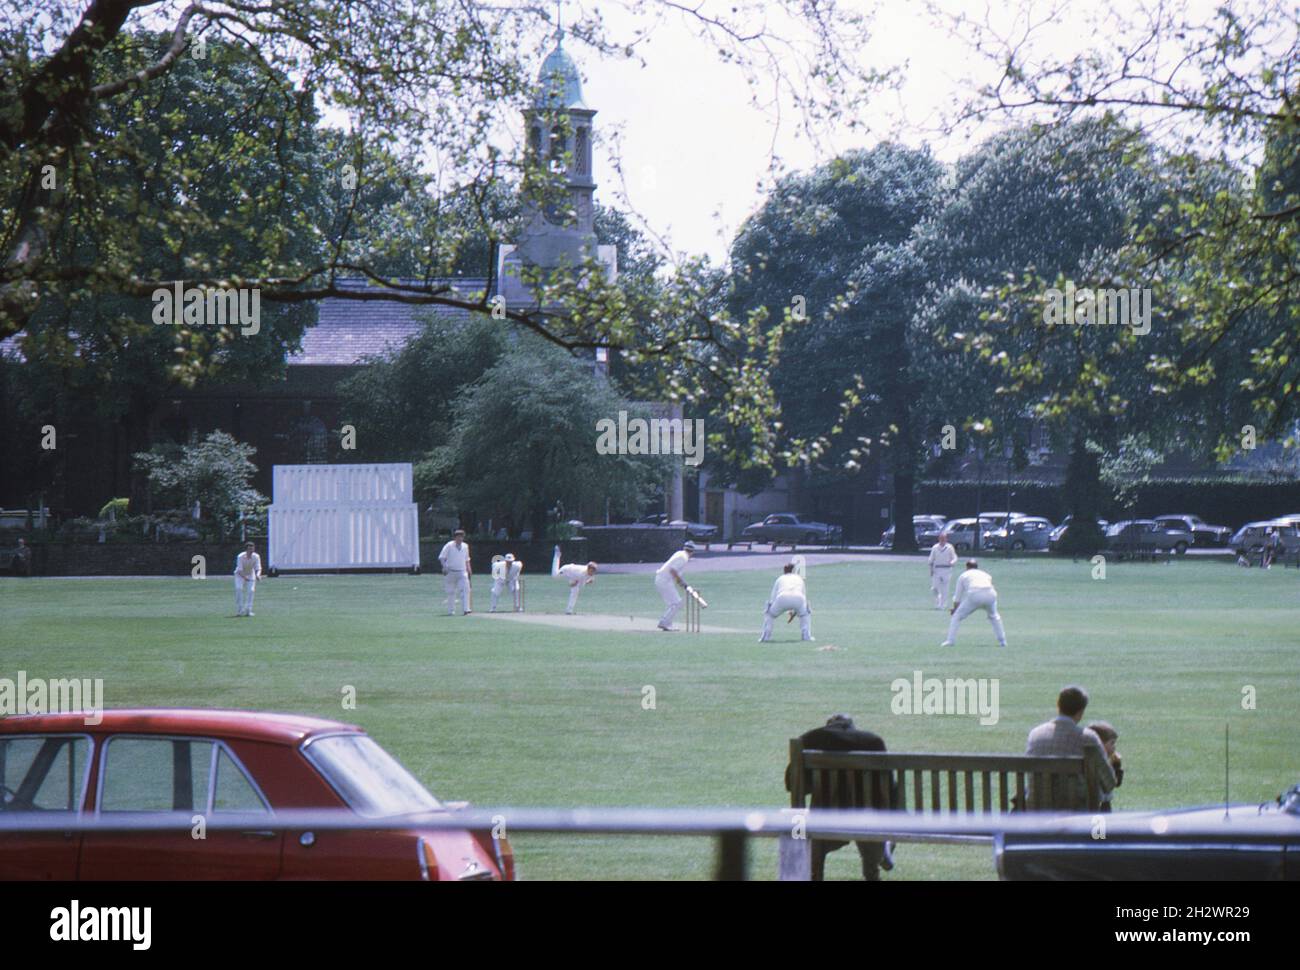 A cricket match involving members of the Kew Cricket Club, at Kew Green, west London in the early 1970s. Spectators are watching the match from a park bench and St Anne's Church lies beyond the cricket ground. Stock Photo